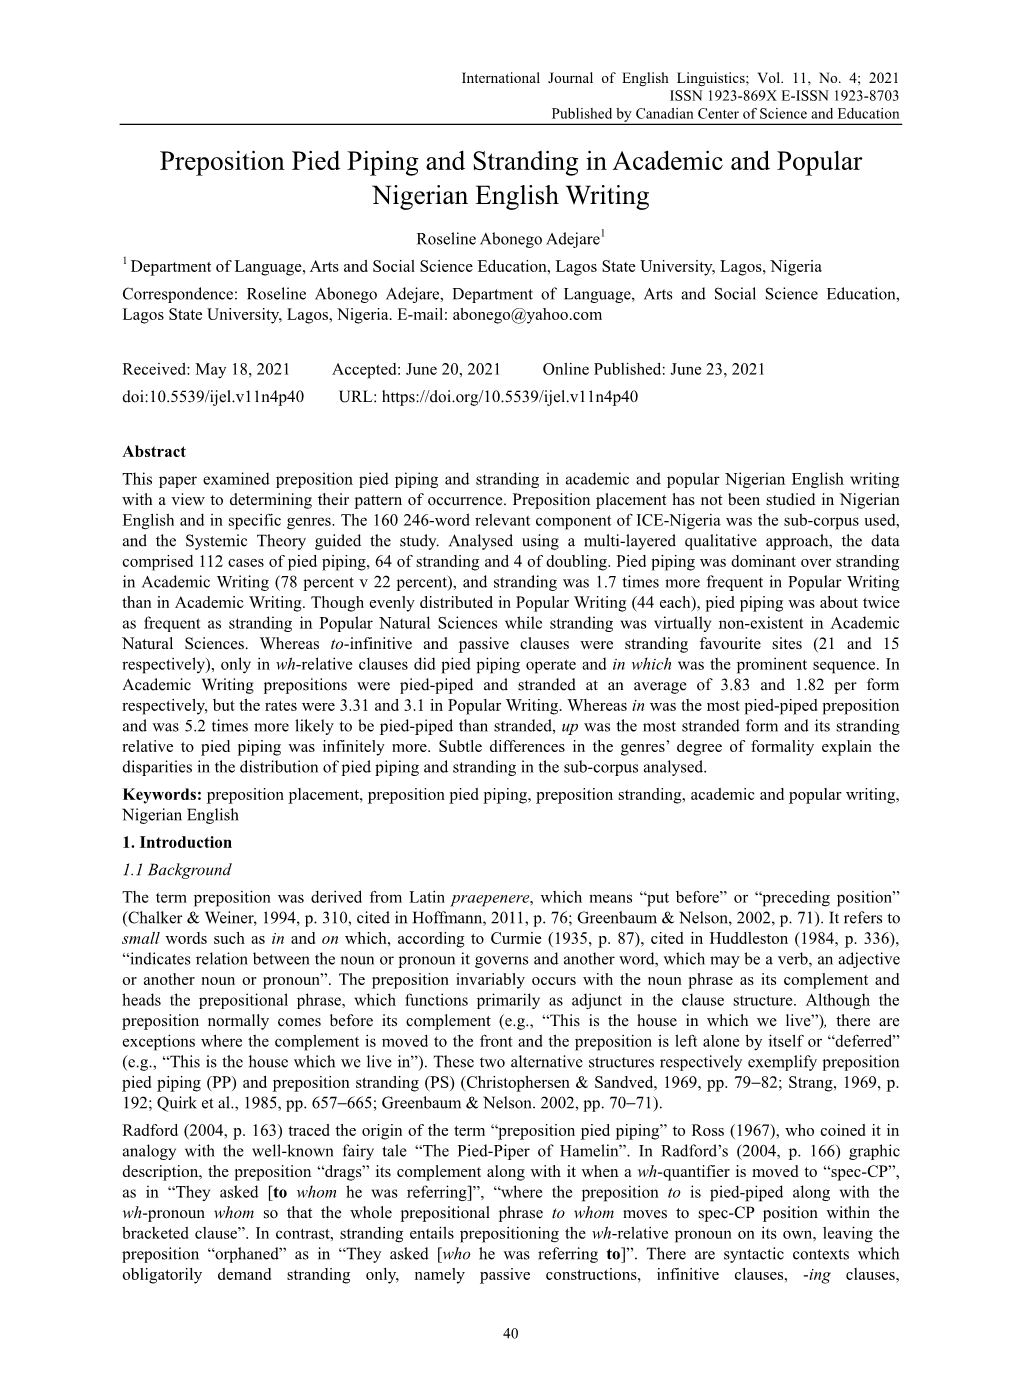 Preposition Pied Piping and Stranding in Academic and Popular Nigerian English Writing